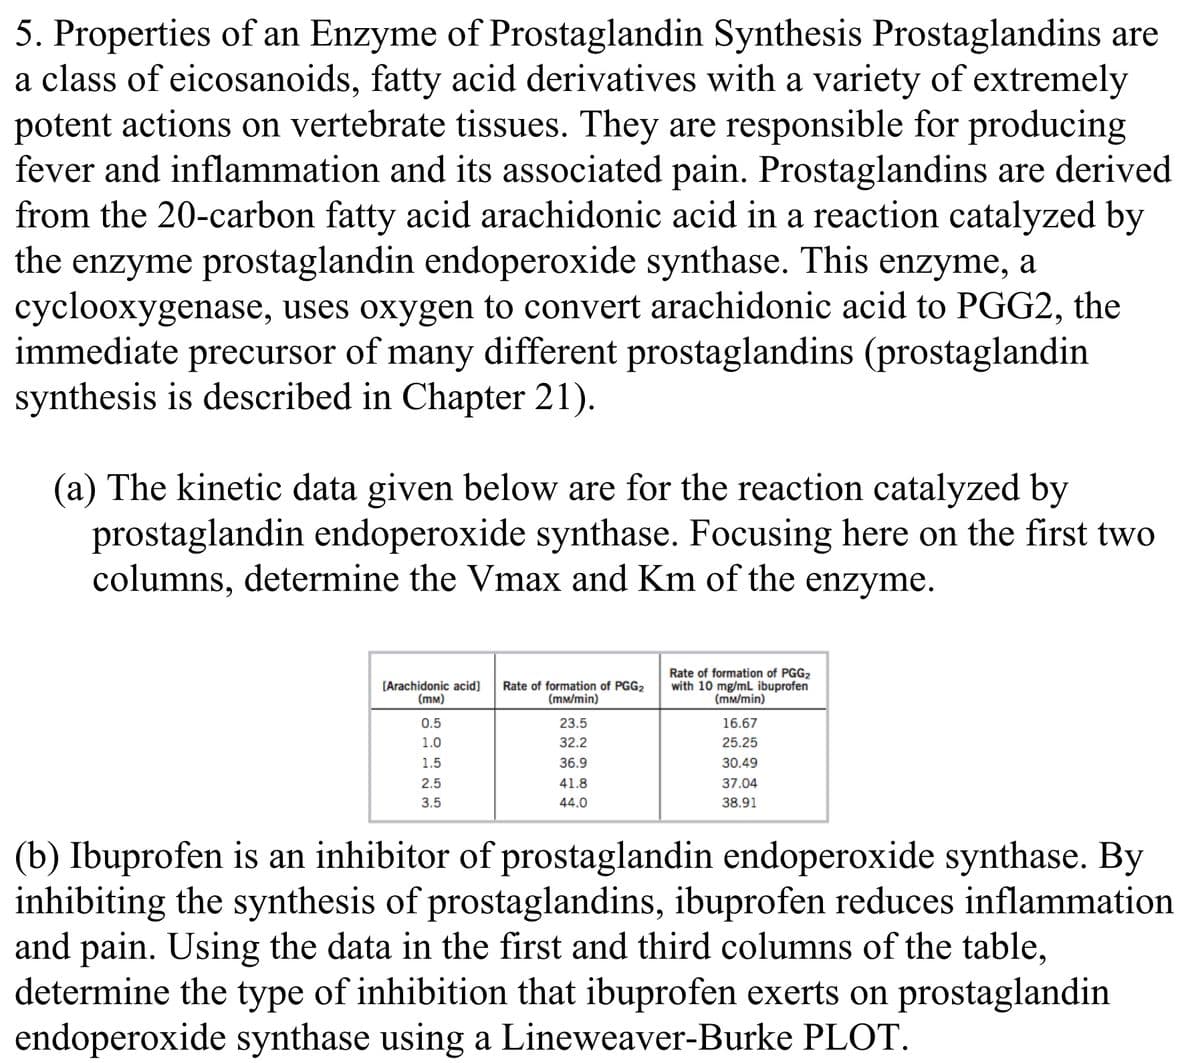 5. Properties of an Enzyme of Prostaglandin Synthesis Prostaglandins are
a class of eicosanoids, fatty acid derivatives with a variety of extremely
potent actions on vertebrate tissues. They are responsible for producing
fever and inflammation and its associated pain. Prostaglandins are derived
from the 20-carbon fatty acid arachidonic acid in a reaction catalyzed by
the enzyme prostaglandin endoperoxide synthase. This enzyme, a
cyclooxygenase, uses oxygen to convert arachidonic acid to PGG2, the
immediate precursor of many different prostaglandins (prostaglandin
synthesis is described in Chapter 21).
(a) The kinetic data given below are for the reaction catalyzed by
prostaglandin endoperoxide synthase. Focusing here on the first two
columns, determine the Vmax and Km of the enzyme.
[Arachidonic acid] Rate of formation of PGG₂
(MM)
(mm/min)
0.5
1.0
1.5
2.5
3.5
23.5
32.2
36.9
41.8
44.0
Rate of formation of PGG₂
with 10 mg/mL ibuprofen
(mm/min)
16.67
25.25
30.49
37.04
38.91
(b) Ibuprofen is an inhibitor of prostaglandin endoperoxide synthase. By
inhibiting the synthesis of prostaglandins, ibuprofen reduces inflammation
and pain. Using the data in the first and third columns of the table,
determine the type of inhibition that ibuprofen exerts on prostaglandin
endoperoxide synthase using a Lineweaver-Burke PLOT.